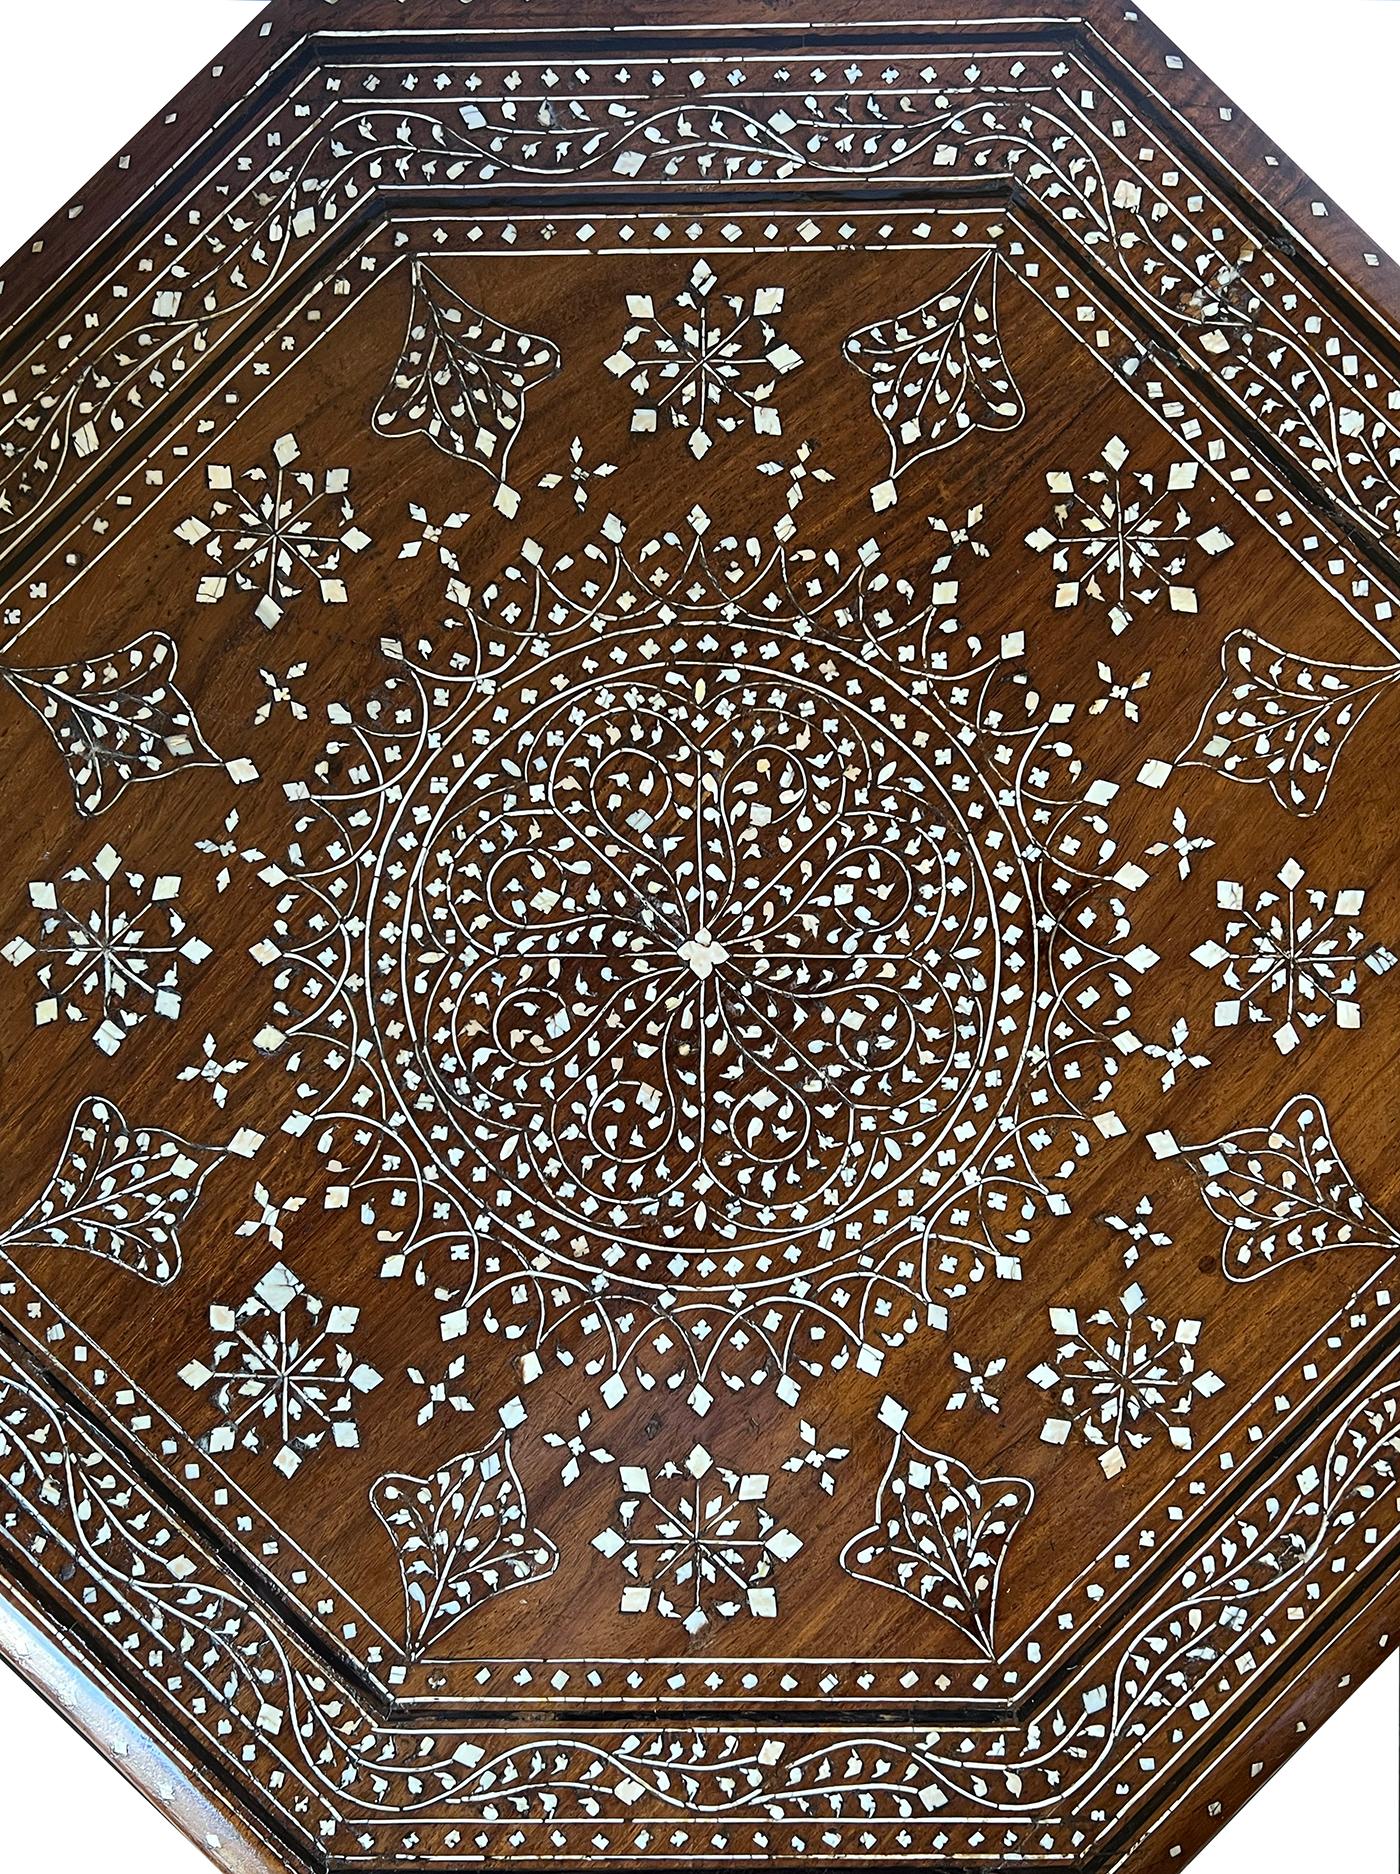 19th Century Large & Intricately Inlaid Anglo Indian Octagonal Side/Traveling Table